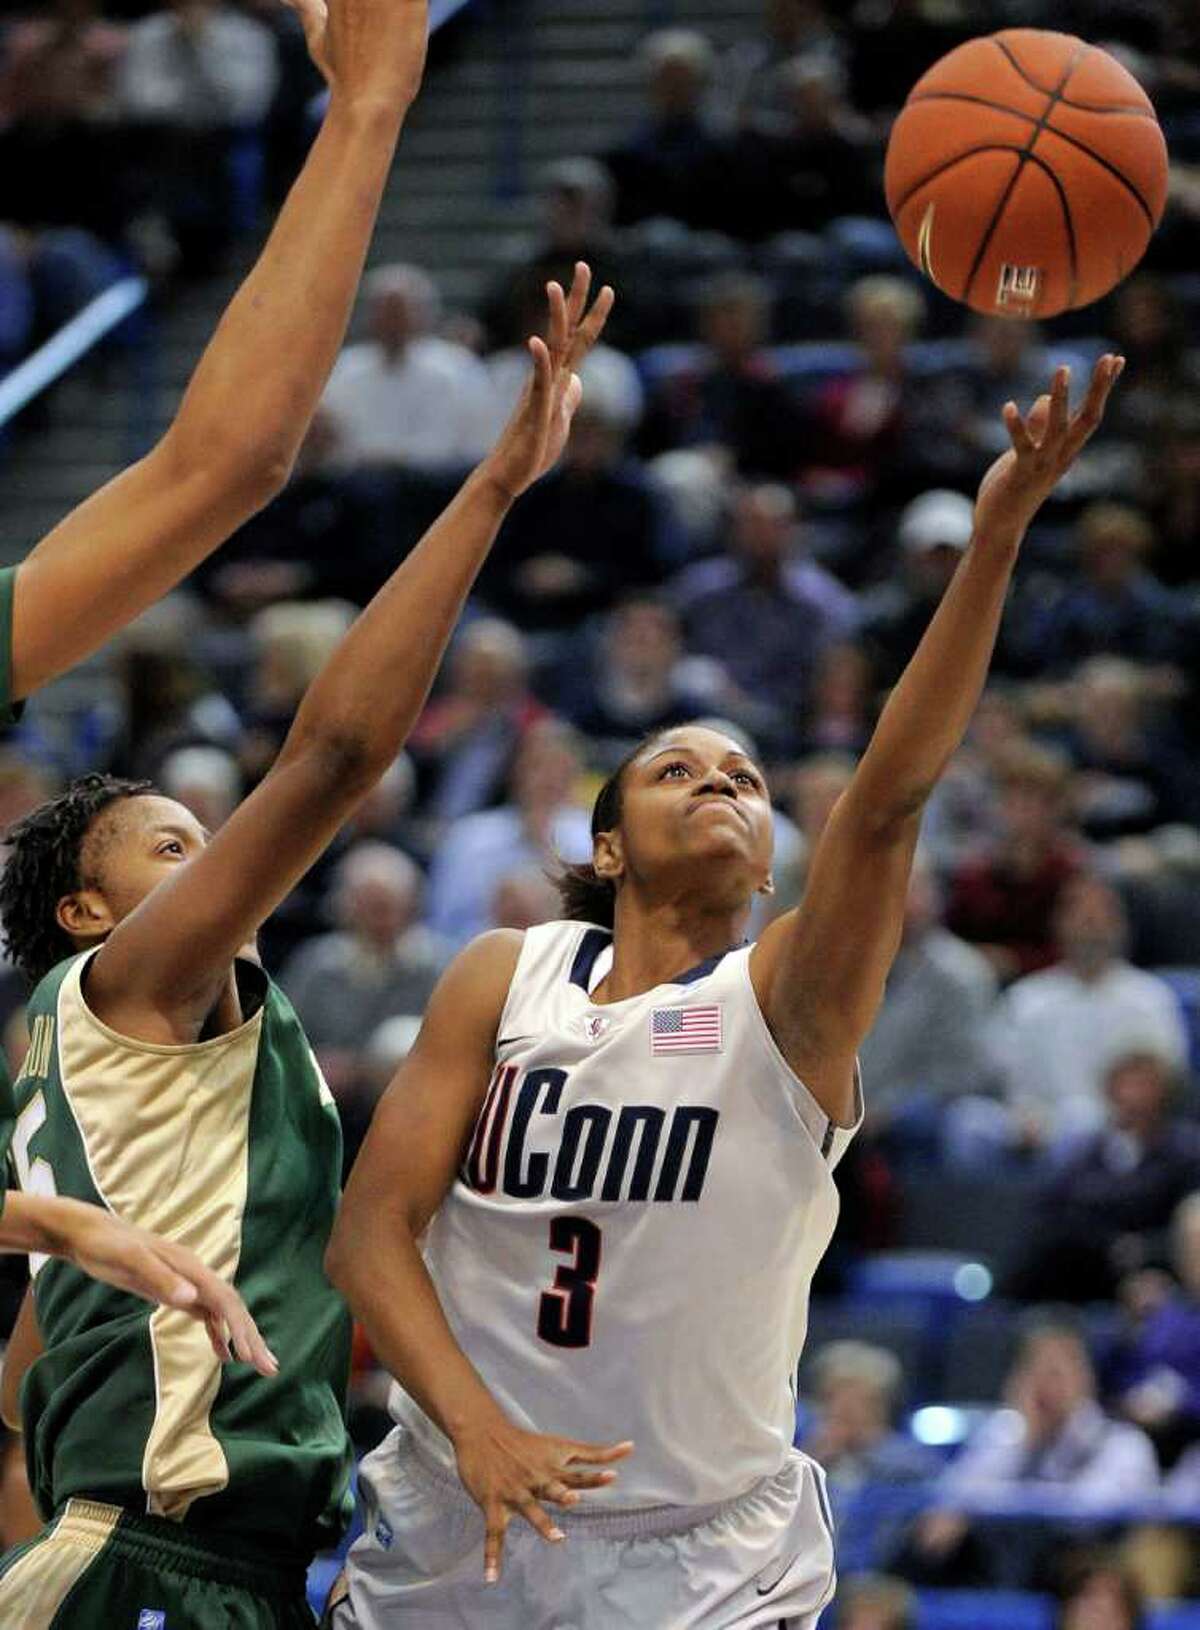 Connecticut's Tiffany Hayes, right, drives past Baylor's Shanay Washington during the first half of an NCAA college basketball game in Hartford, Conn., on Tuesday, Nov. 16, 2010. (AP Photo/Fred Beckham)